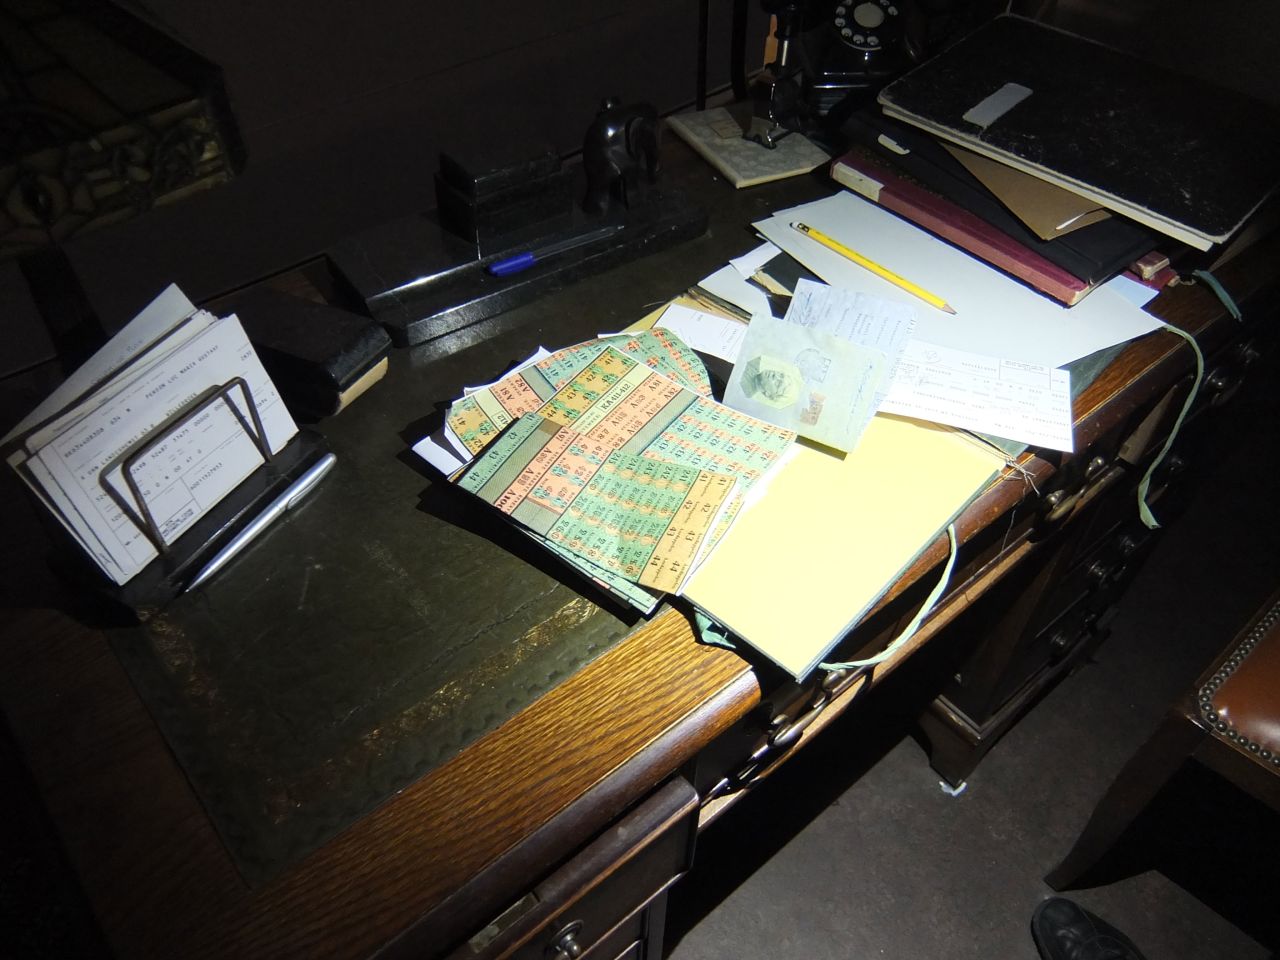 Unseen by the audience, a desktop featured in one scene is covered in realistic wartime documents, showing the production's intense attention to detail.